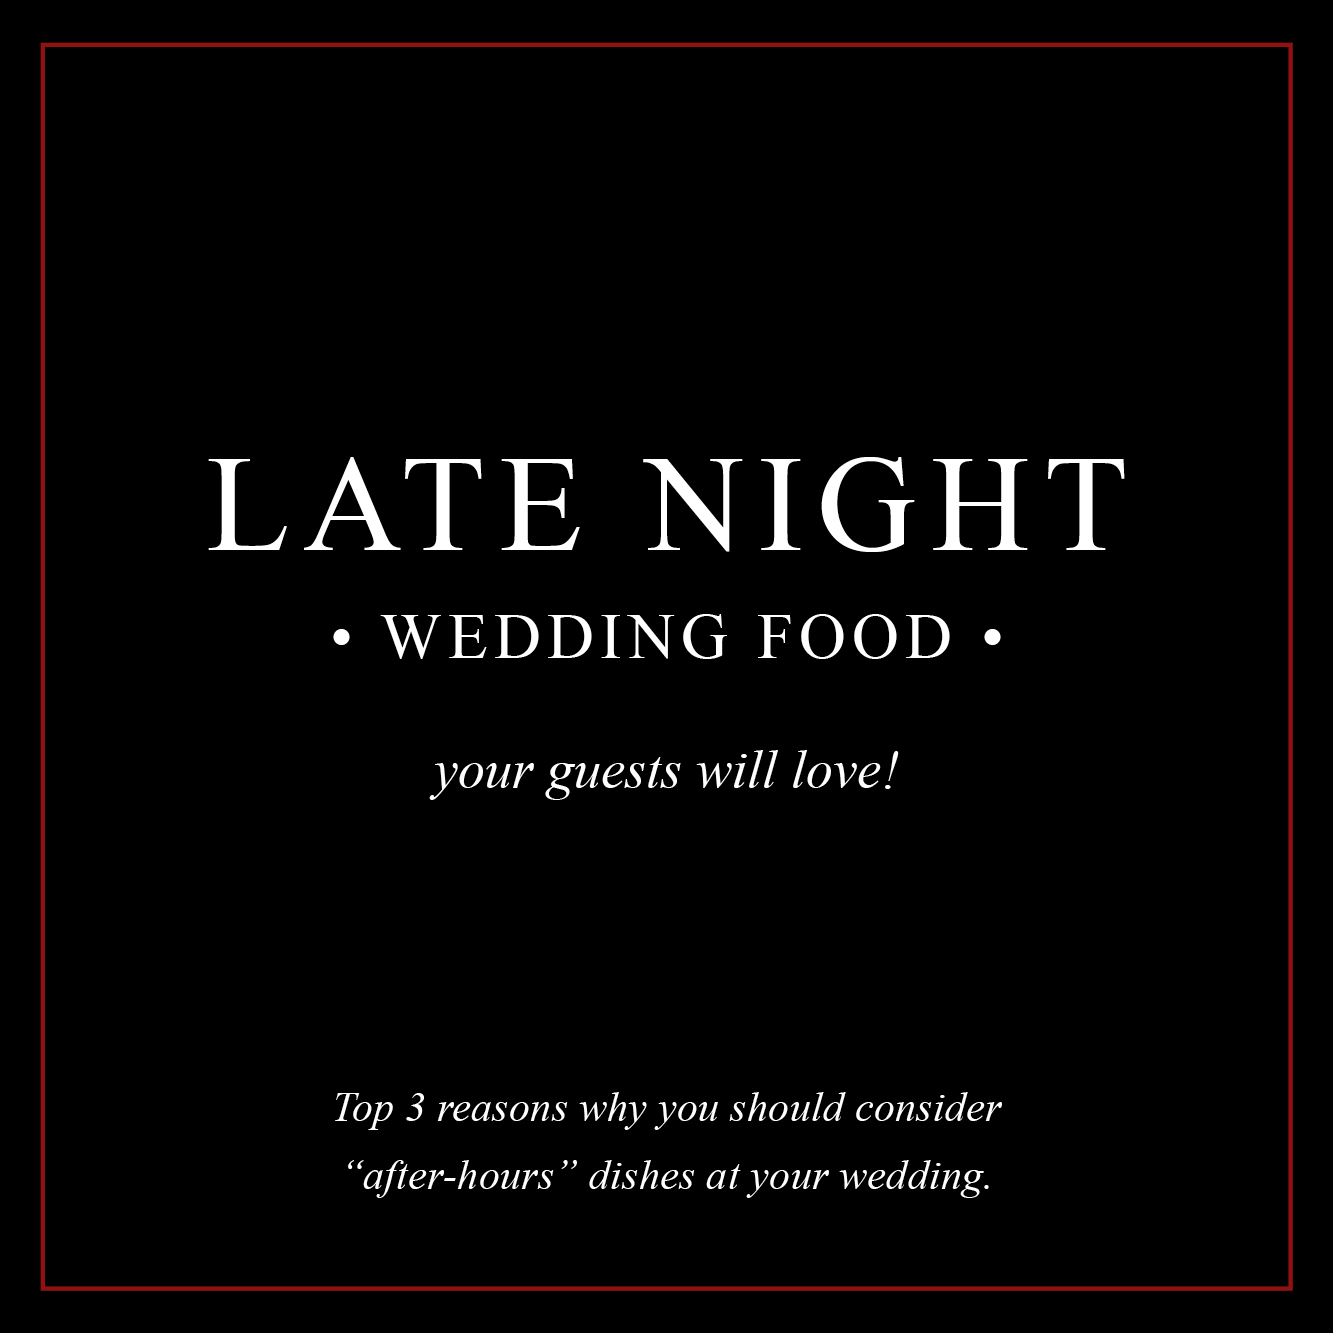 Wedding Caterer in Dallas's Top 3 Ideas for Late Night Wedding Food | Gil's Elegant Catering